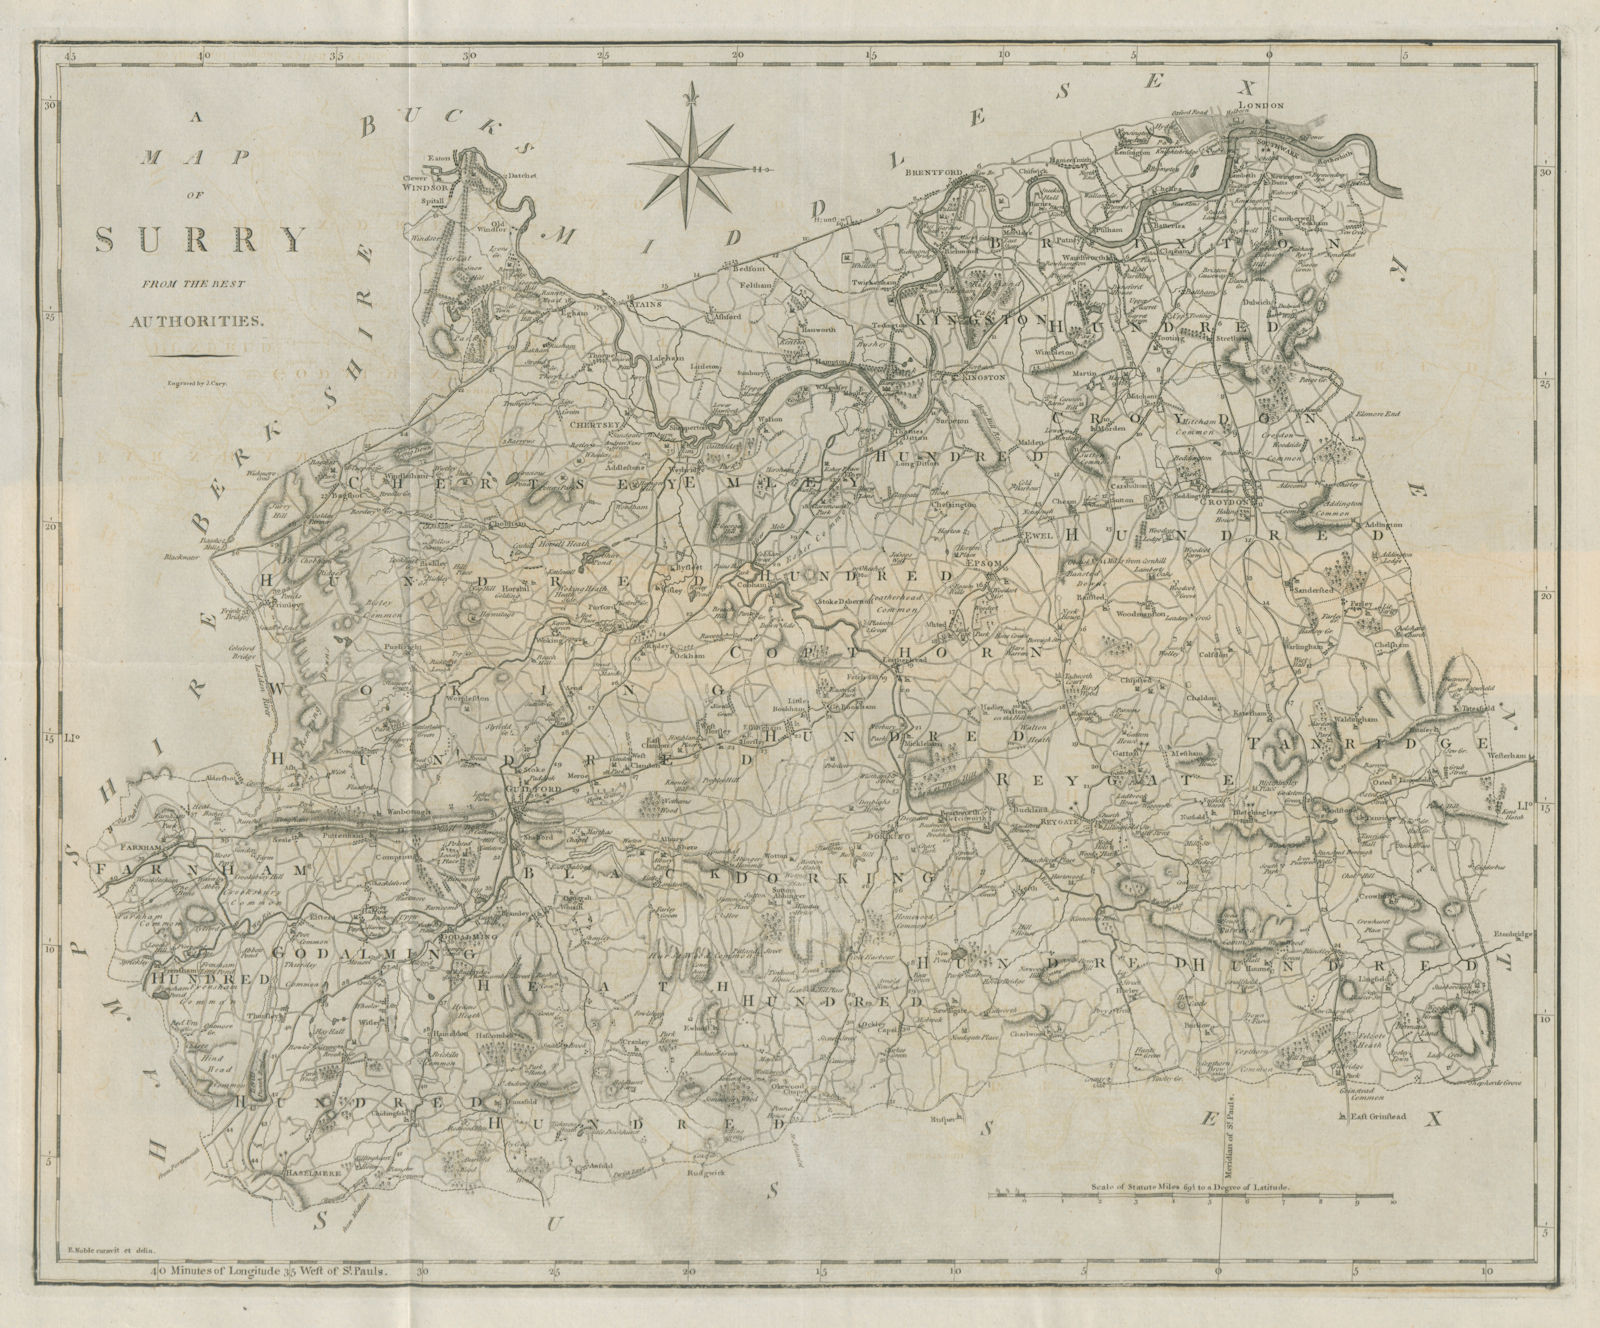 "A map of Surry from the best authorities". Surrey county map. CARY 1789